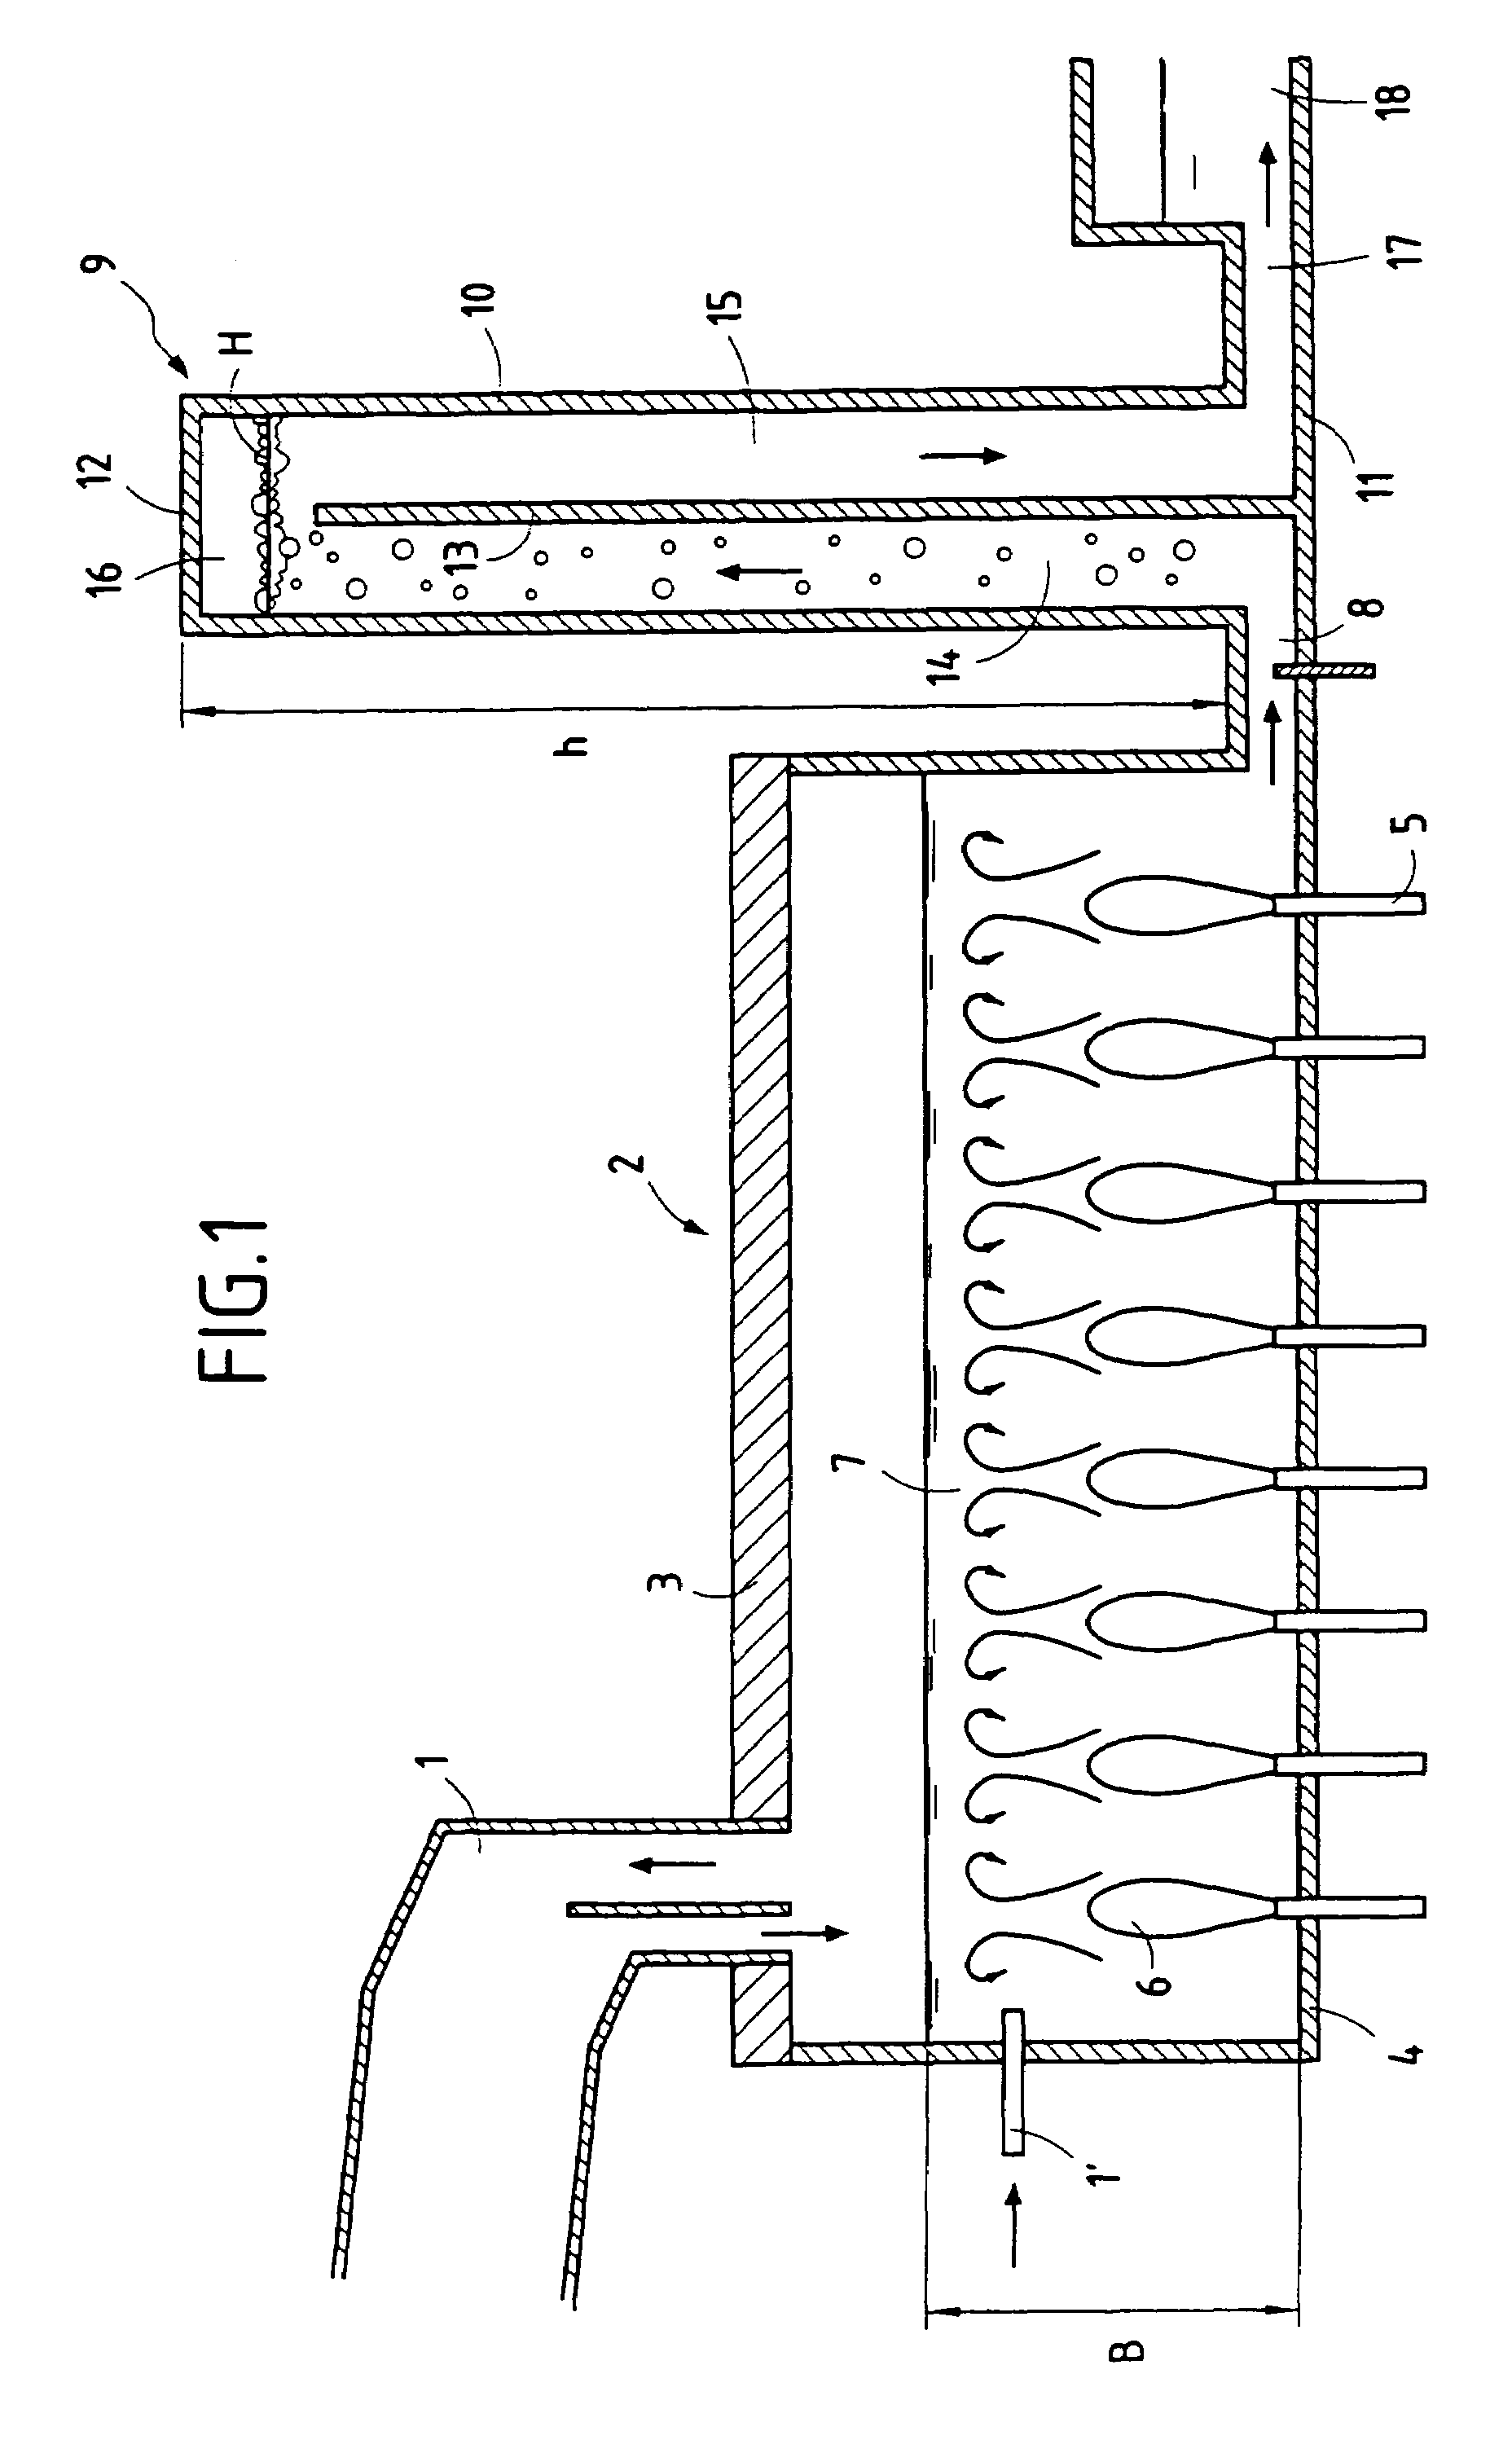 Method and device for melting and refining materials capable of being vitrified